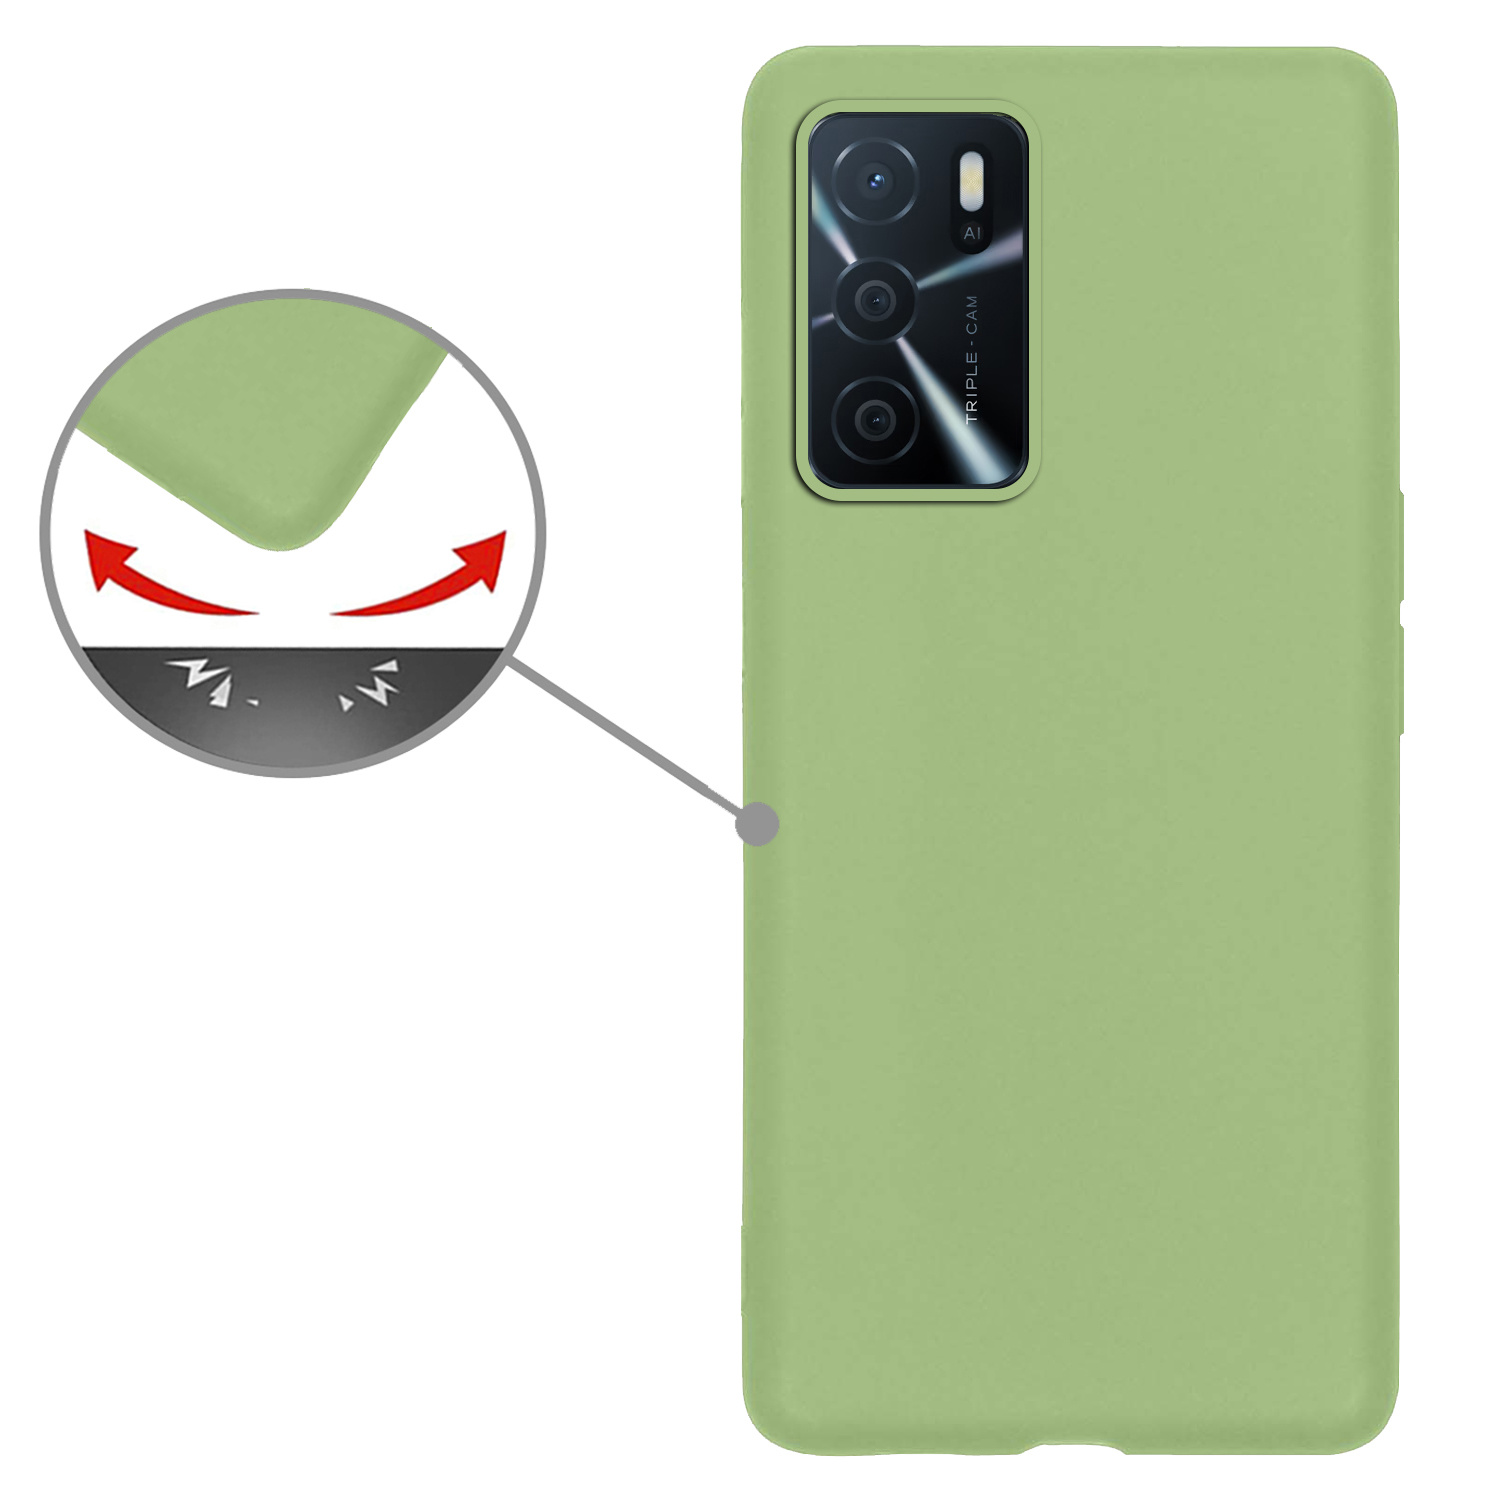 Nomfy OPPO A16 Hoes Cover Siliconen Case - OPPO A16 Hoesje Case Siliconen Hoes Back Cover - Groen - 2 PACK